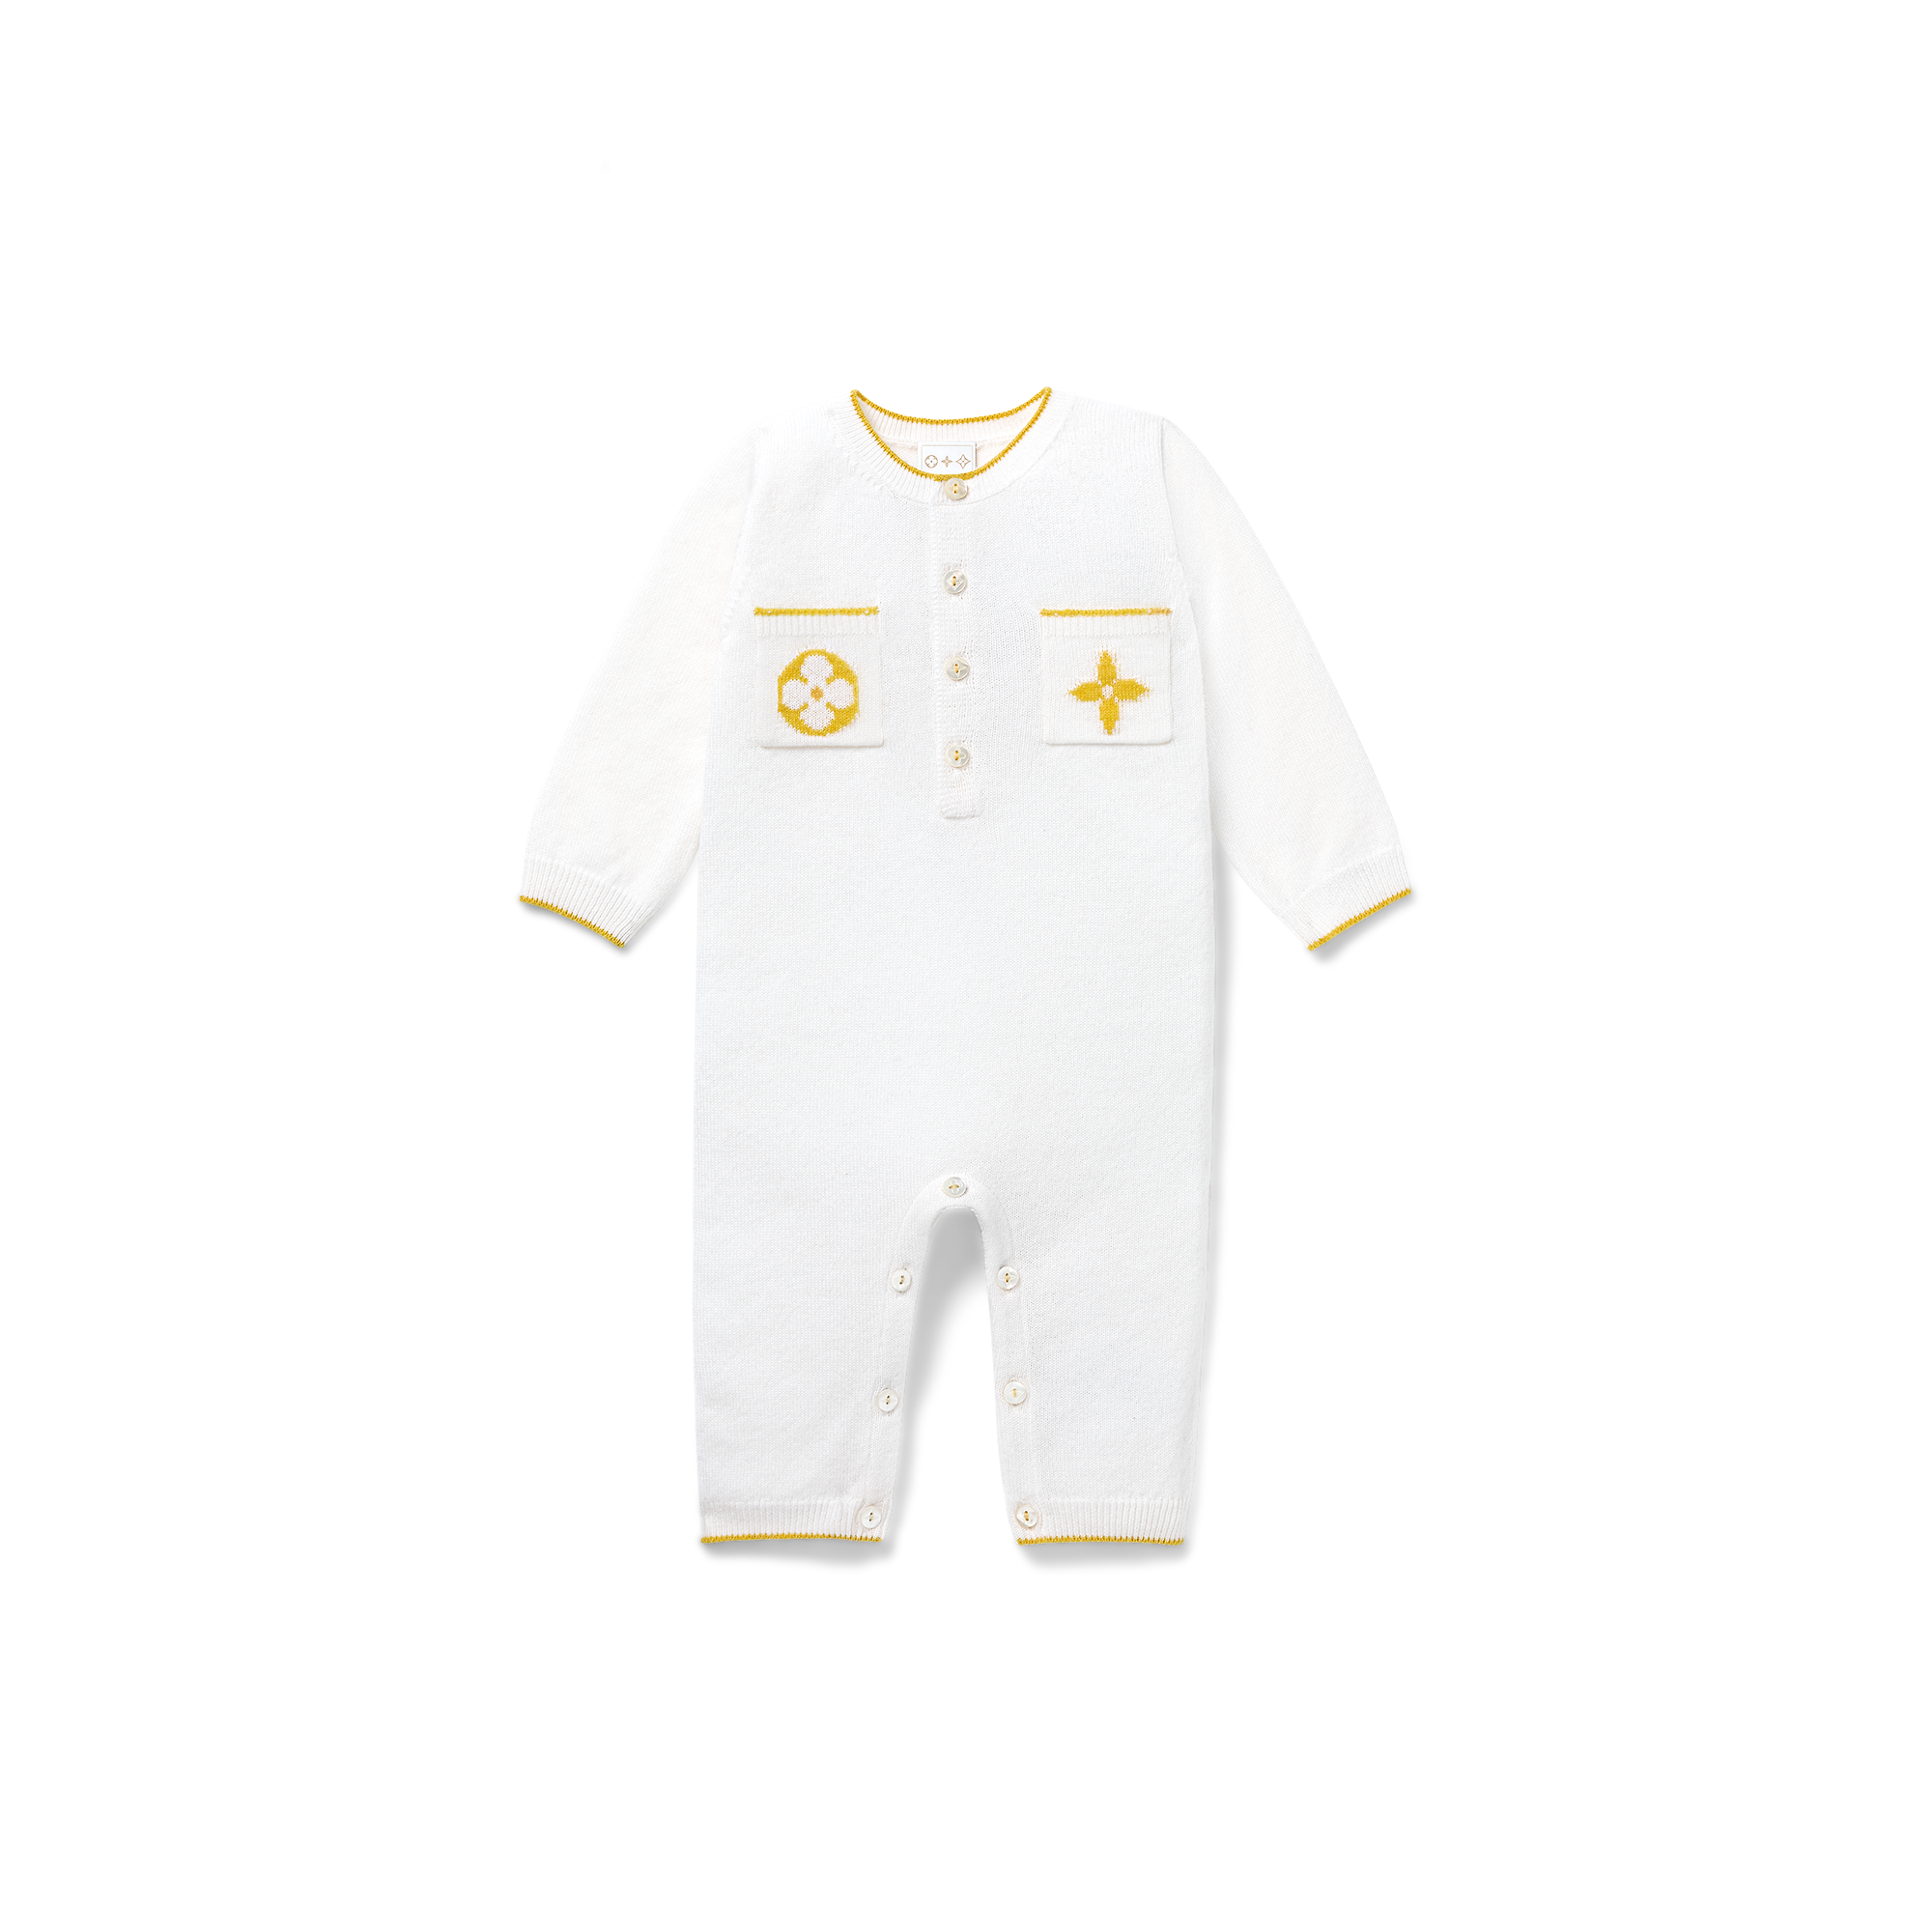 Louis Vuitton 2 Pockets Suit S00 – New – For Baby GI008D White Yellow